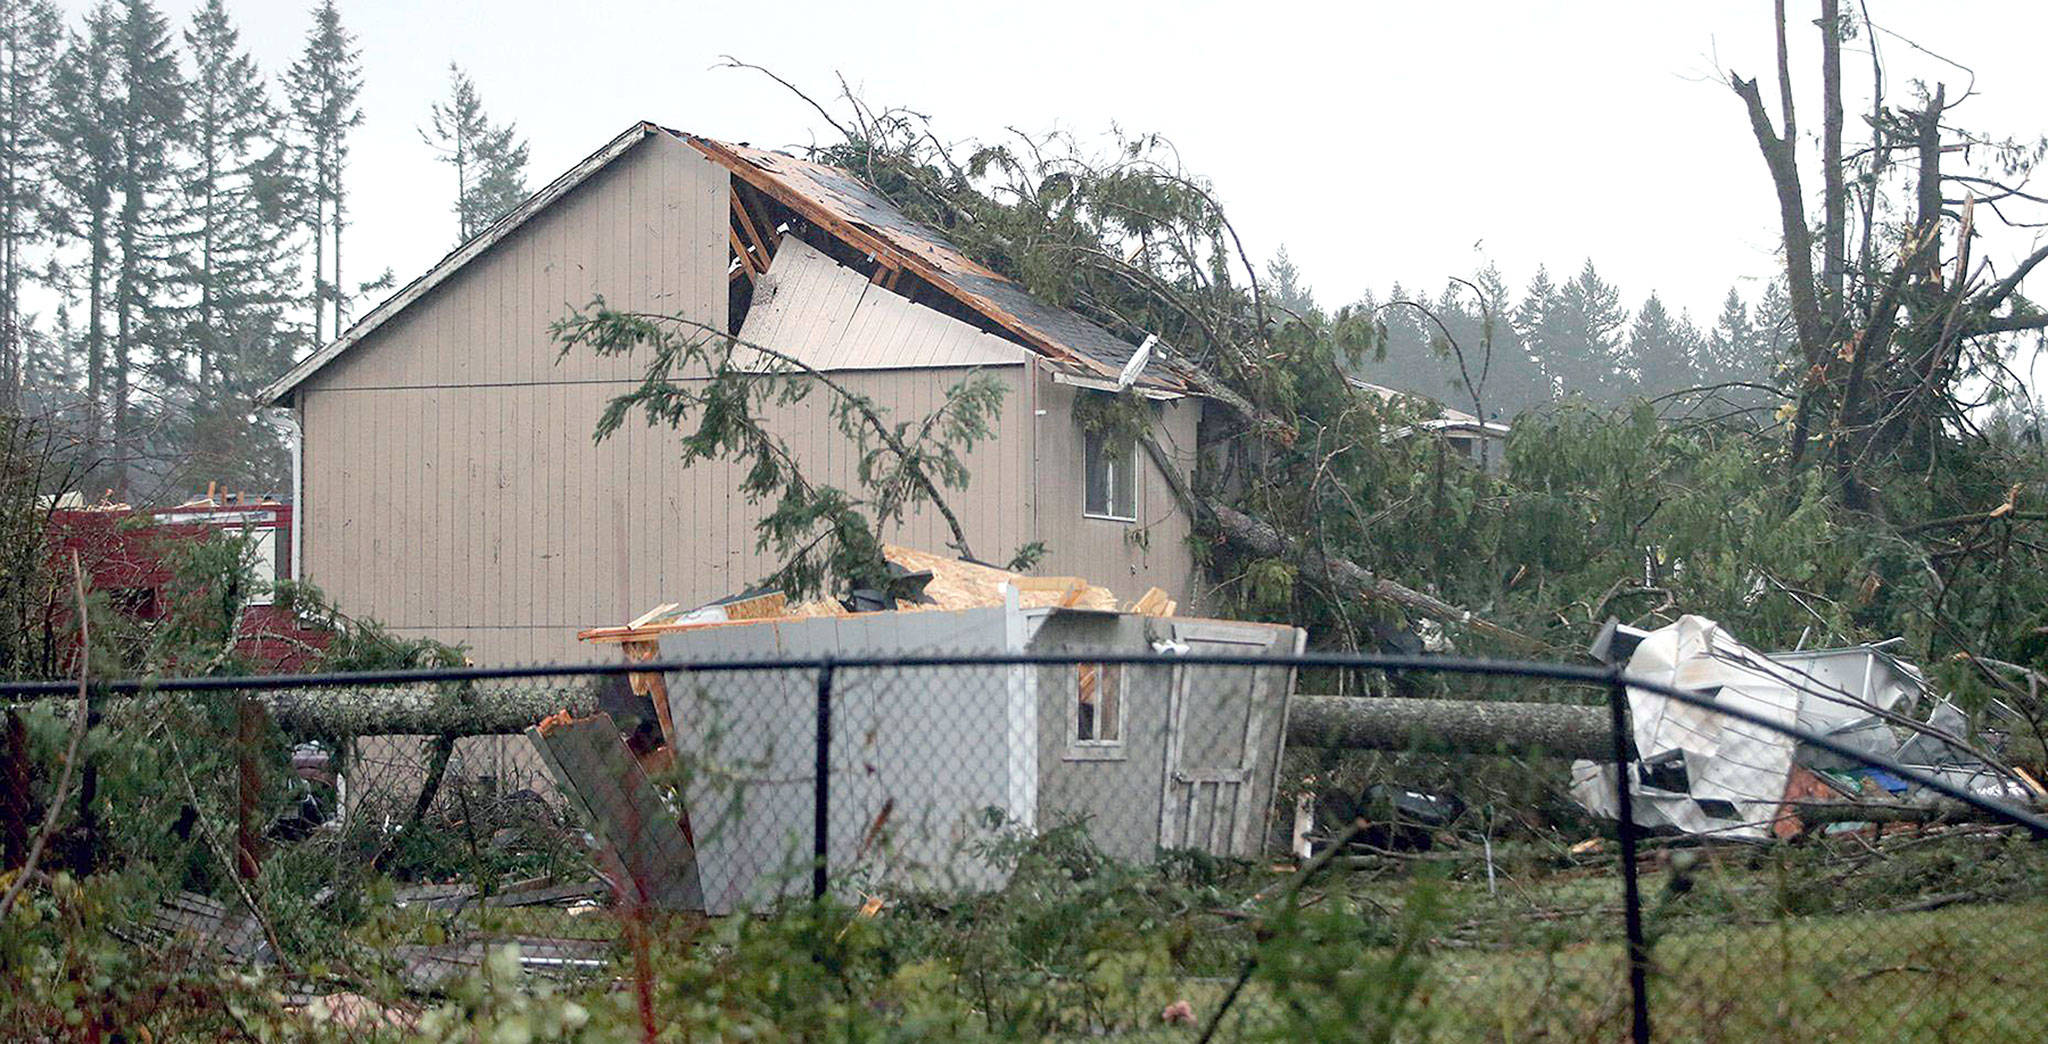 This is among the homes that were damaged in Port Orchard on Tuesday when a rare tornado touched down. (Larry Steagall/Kitsap Sun via AP)